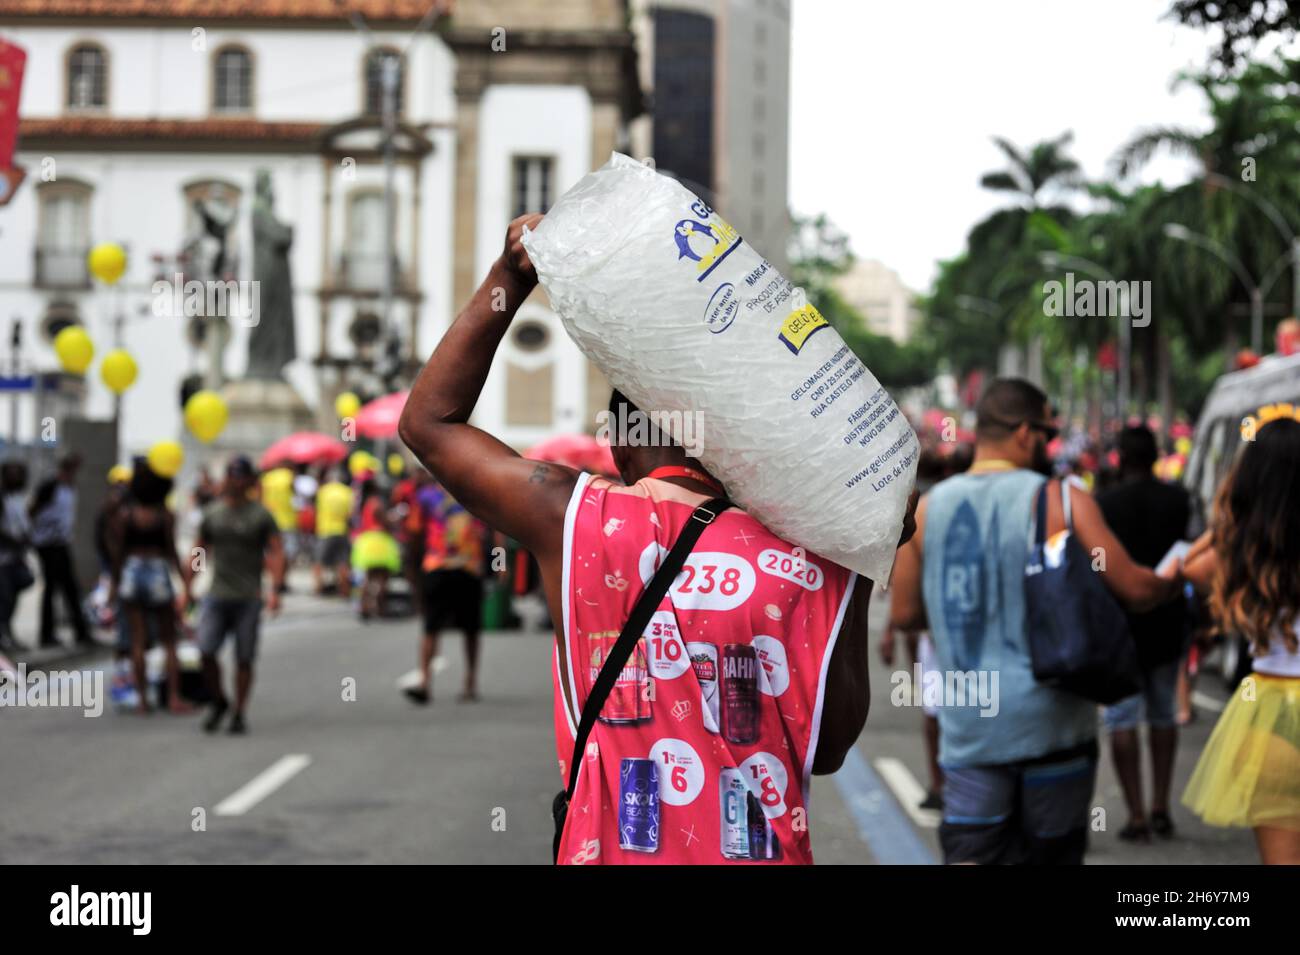 Brazil – February 22, 2020: A street vendor sells ice cubes for beverage cooling during a traditional Carnival street party in central Rio de Janeiro. Stock Photo